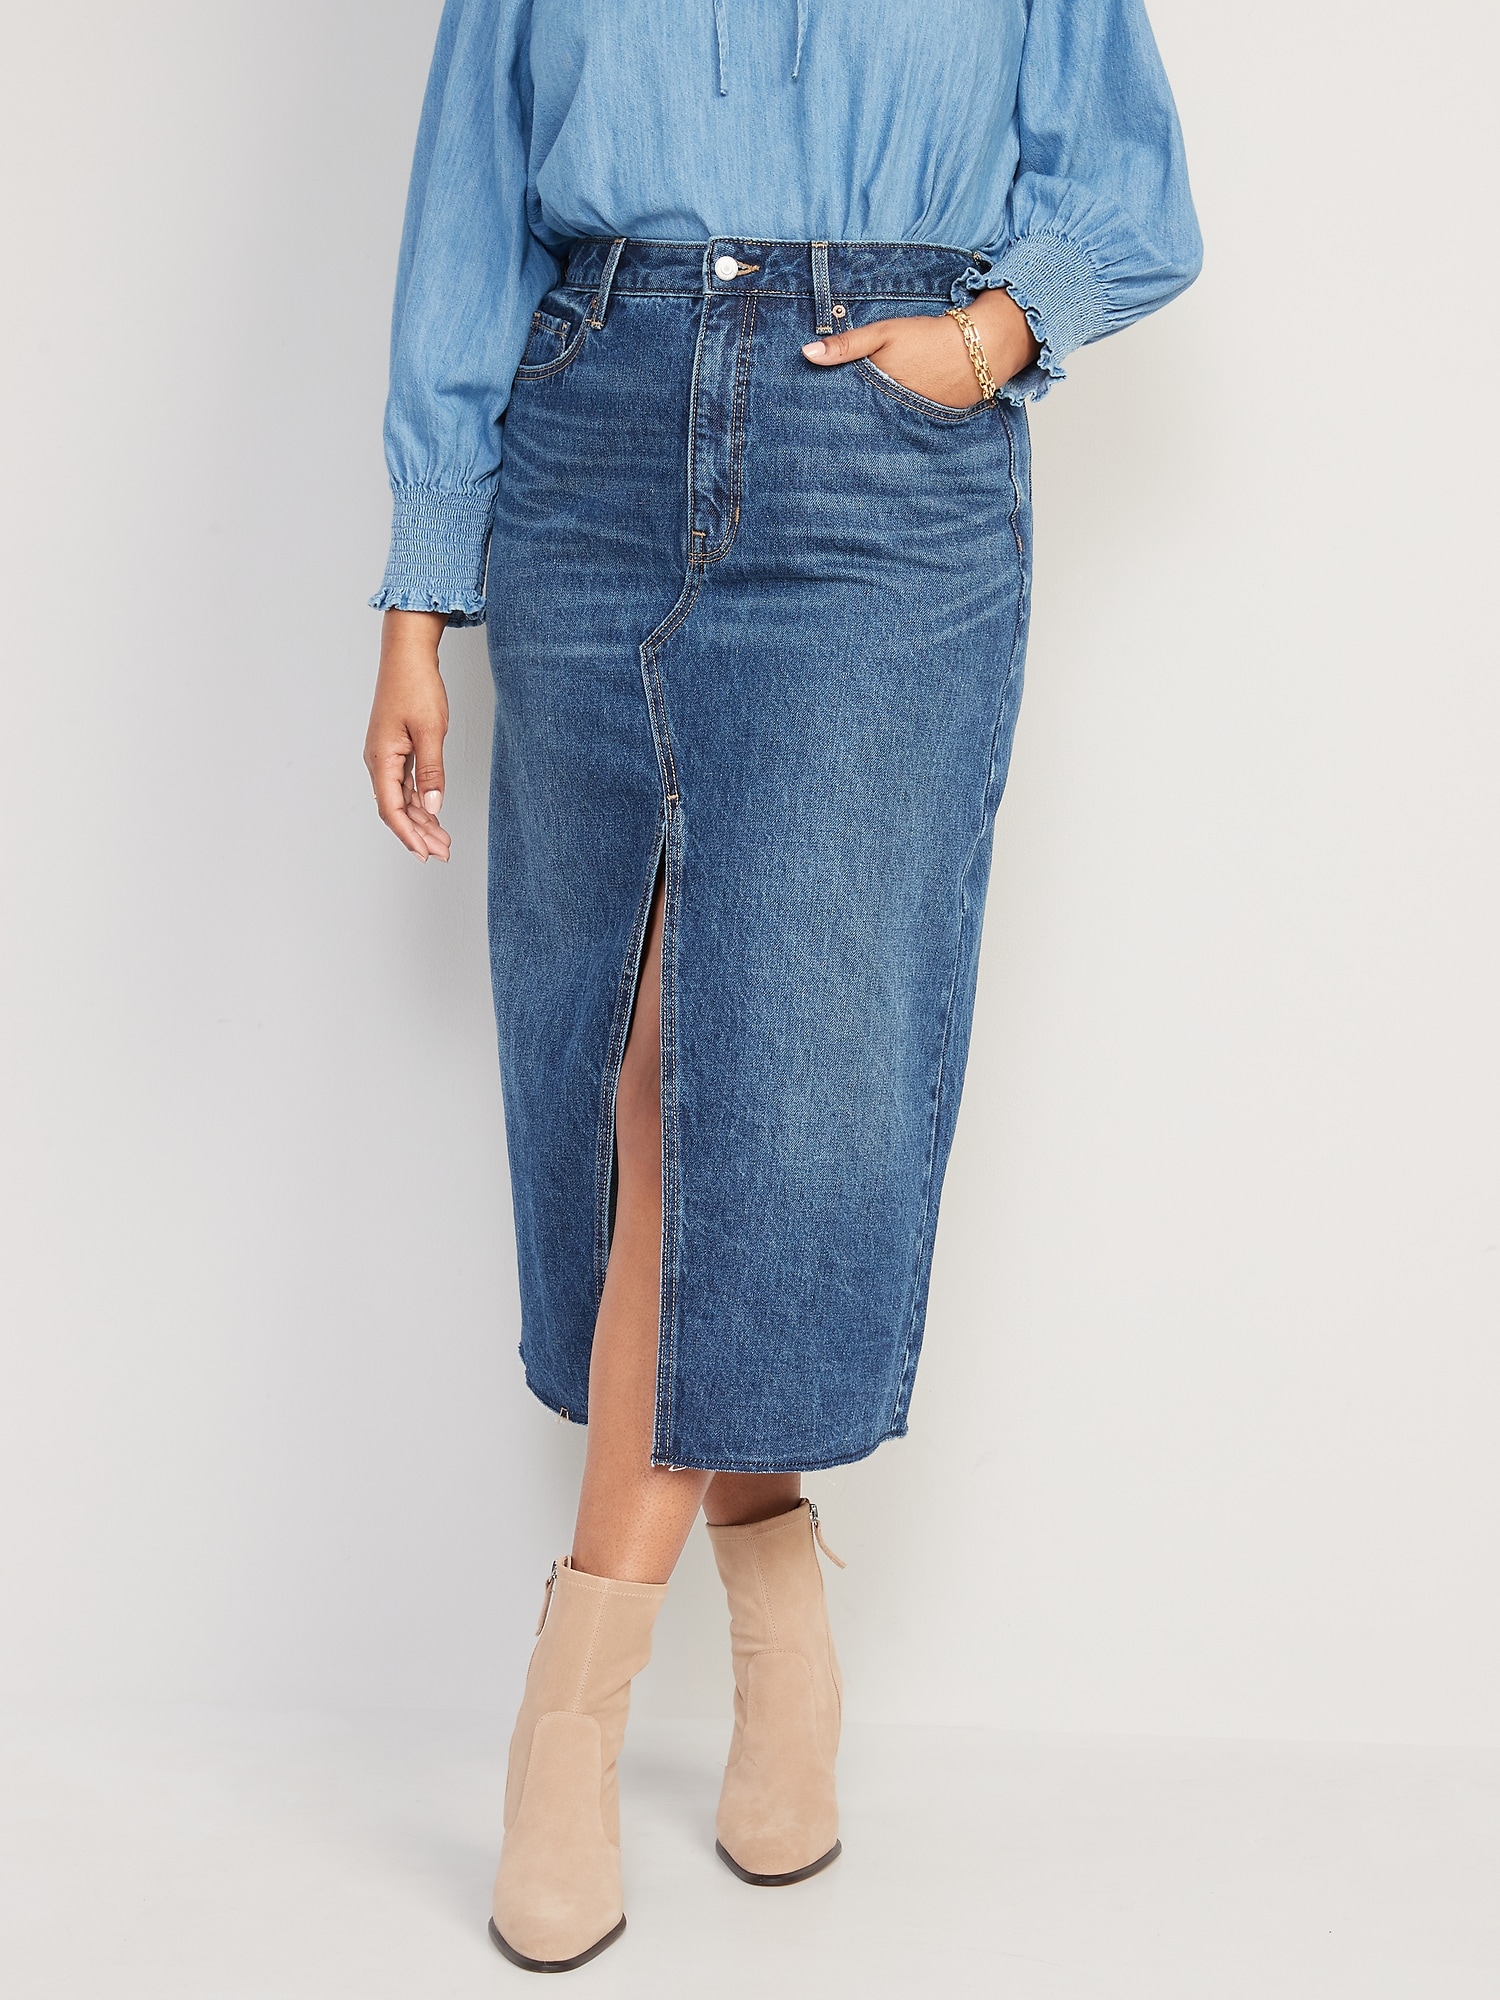 2023 Denim Trends: 4 Plus-Size Friendly Trends I'm Shopping | Who What Wear